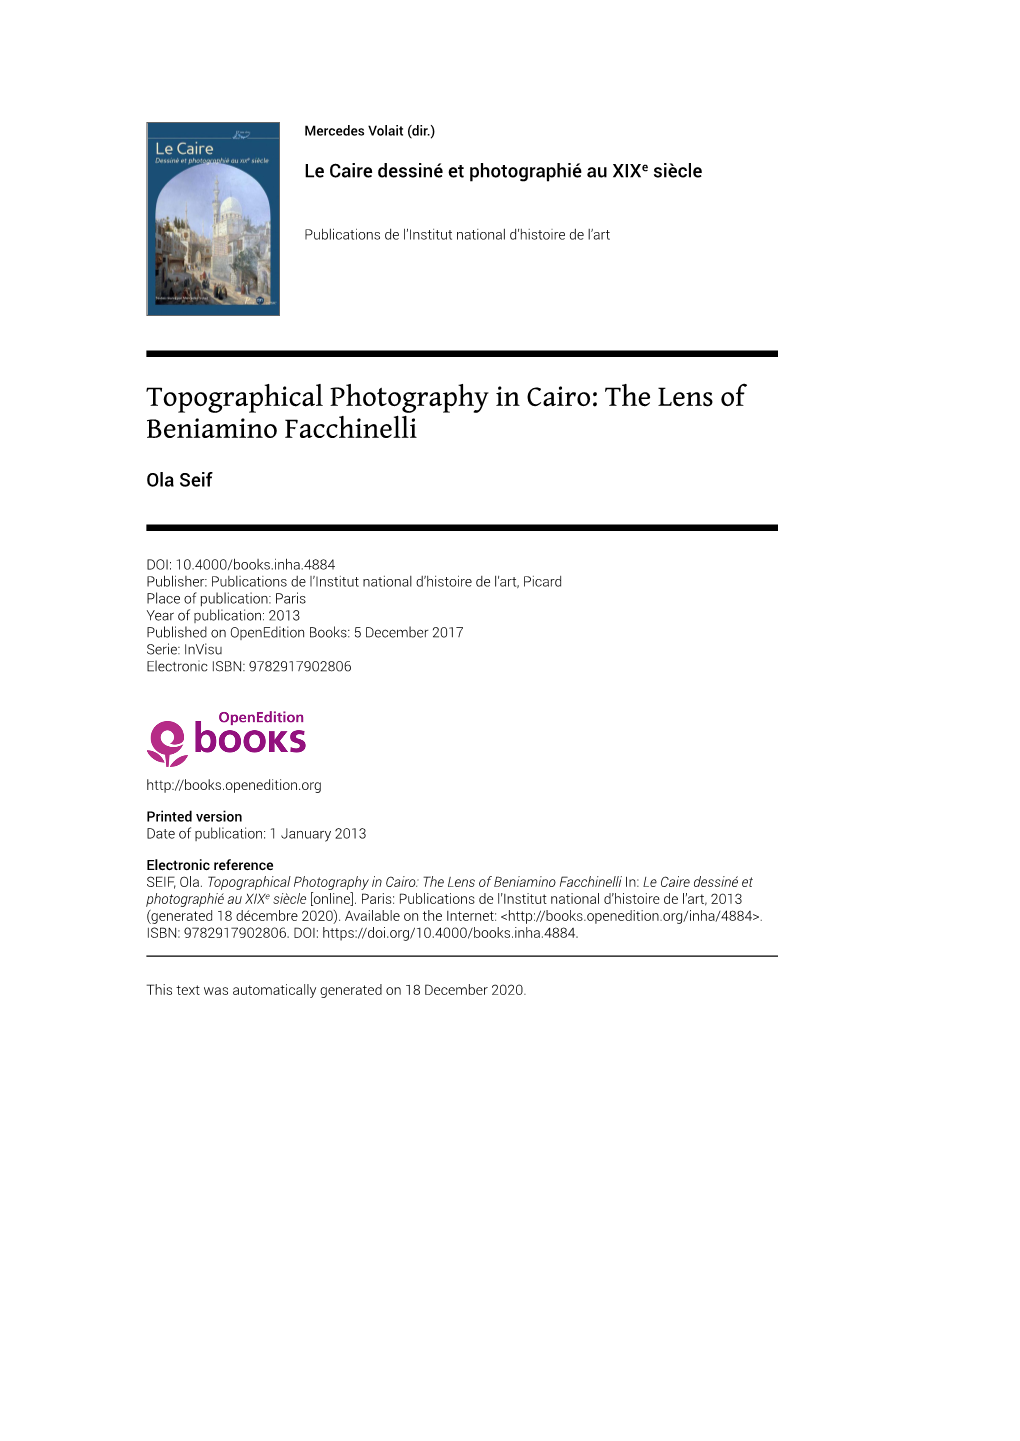 Topographical Photography in Cairo: the Lens of Beniamino Facchinelli